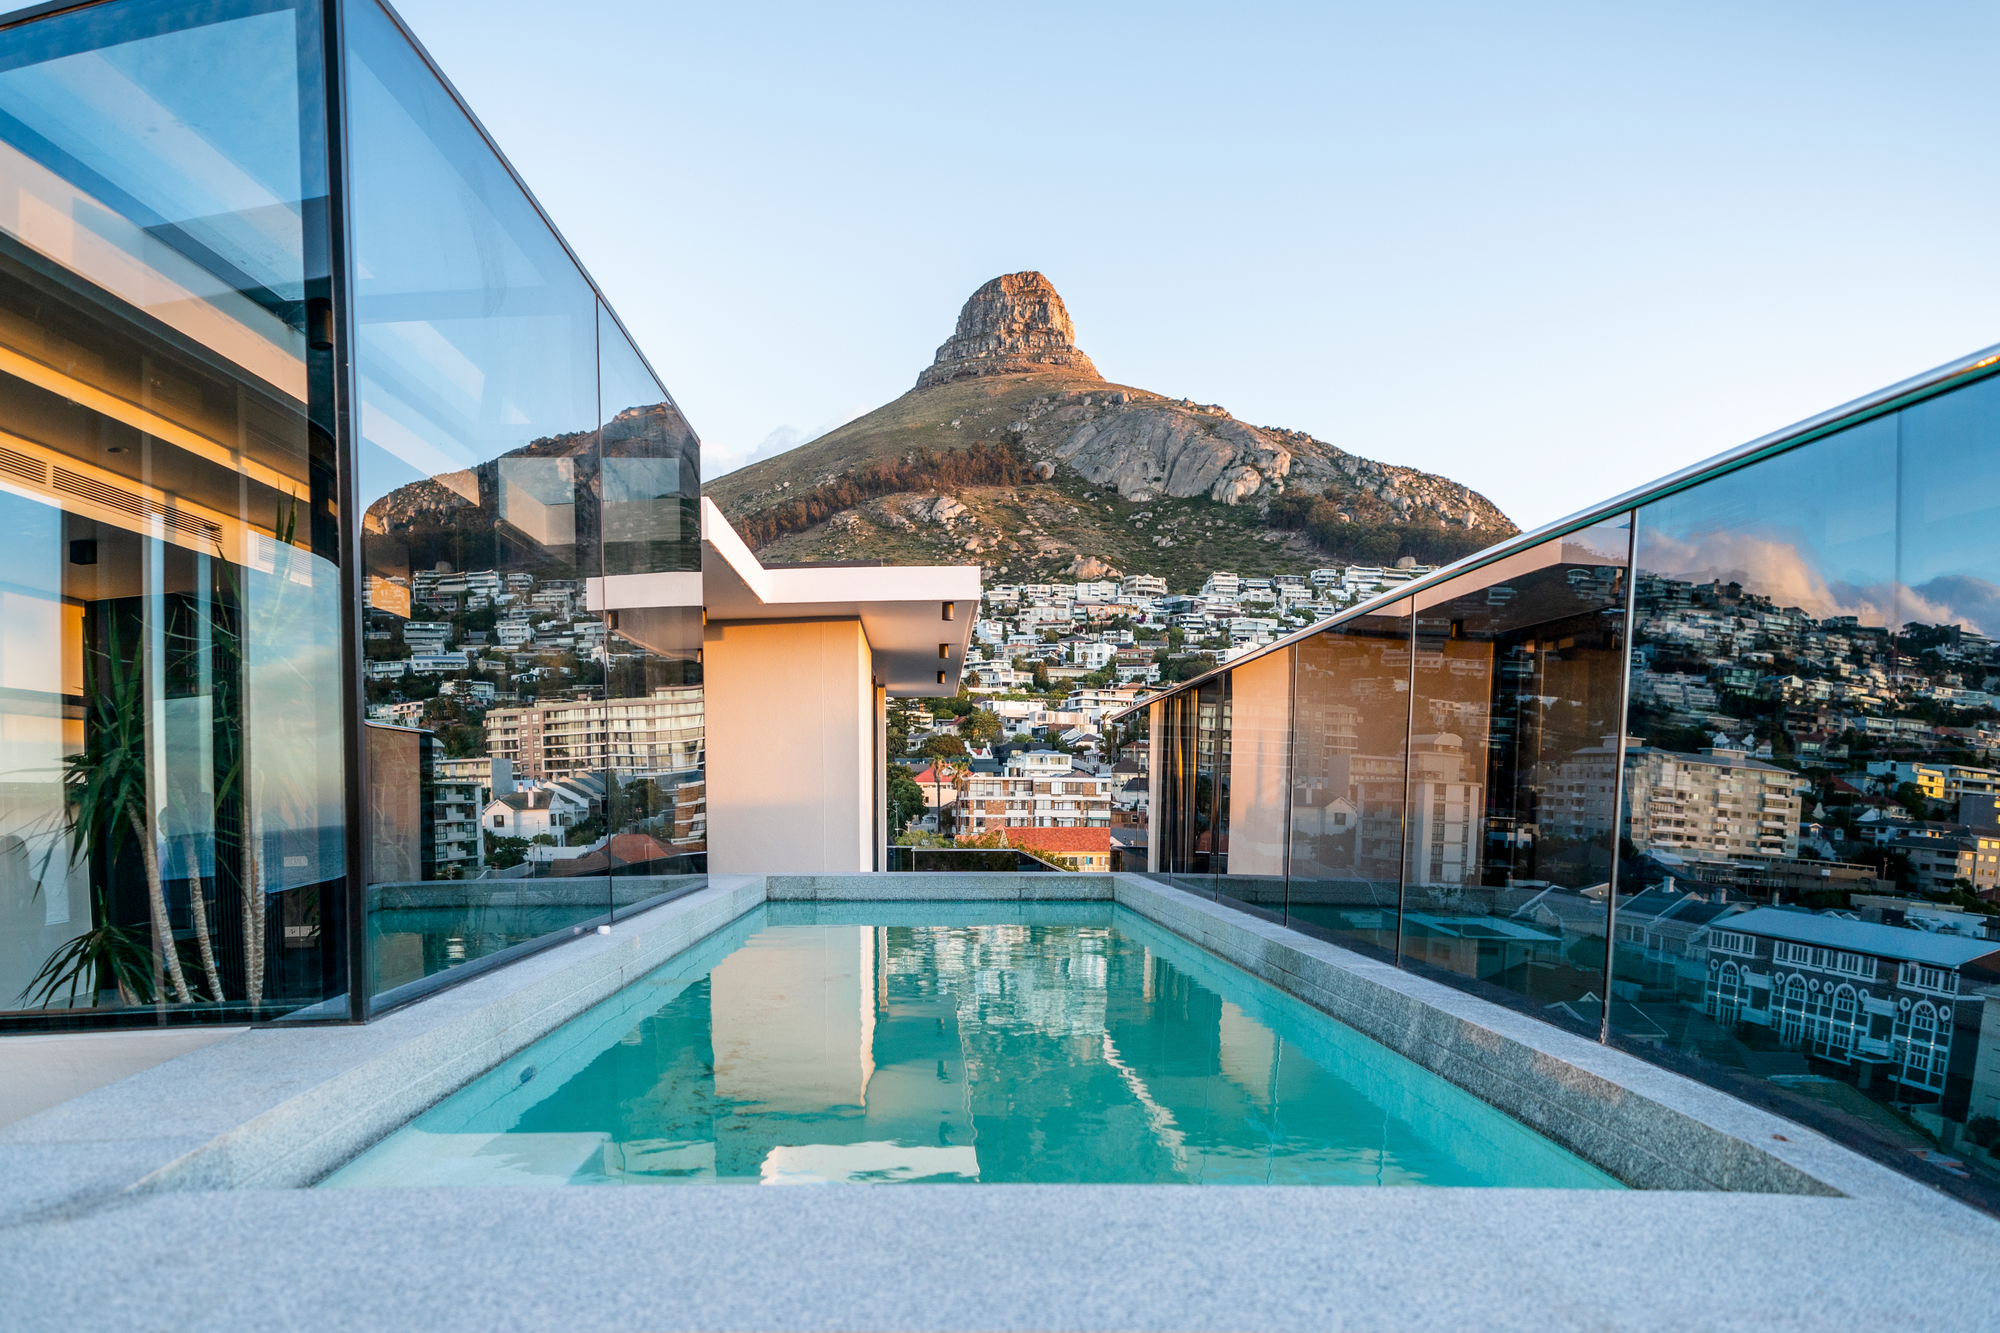 Latitude Aparthotel is the newest and most Instagrammable hotel in Cape Town